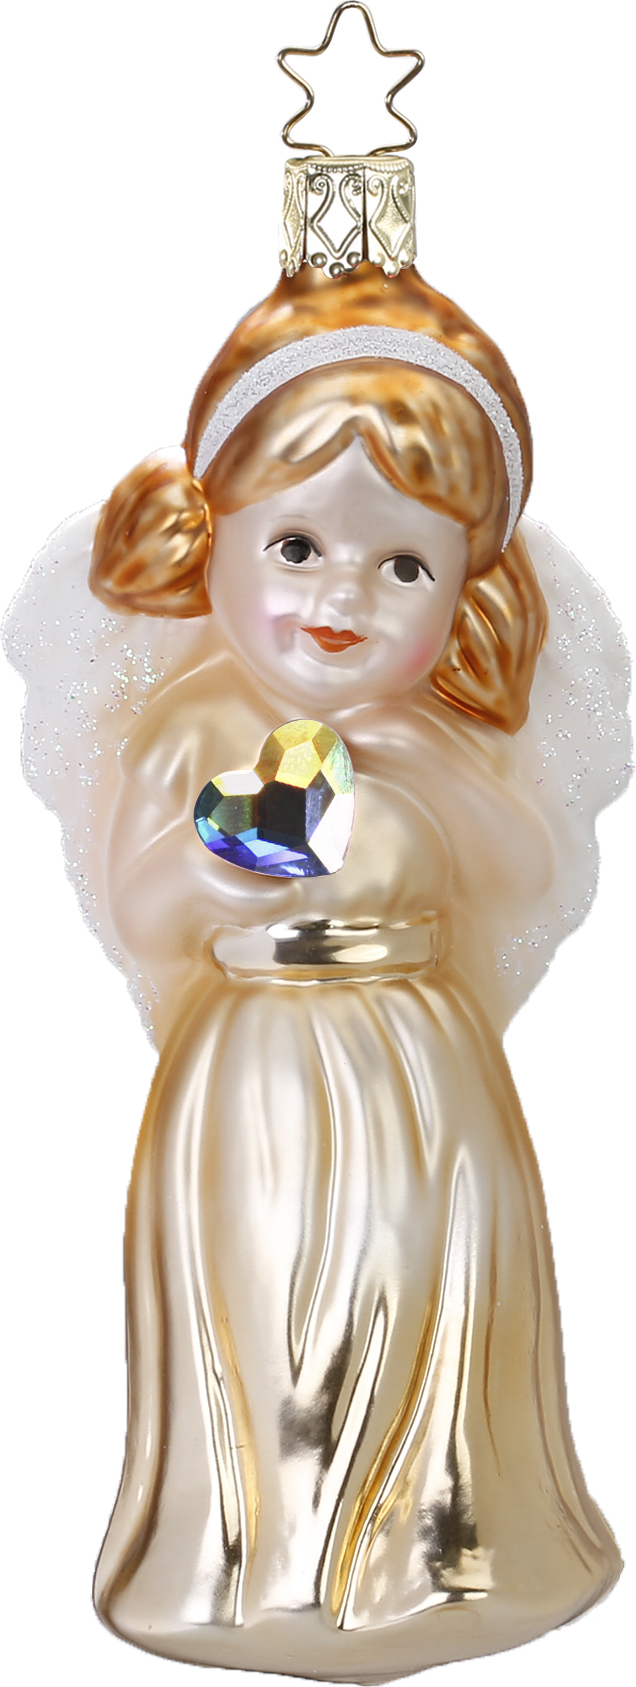 Details about   Inge Glas Christmas Ornament Angel Face Matte Germany Glass Inges Heirlooms 3″ 